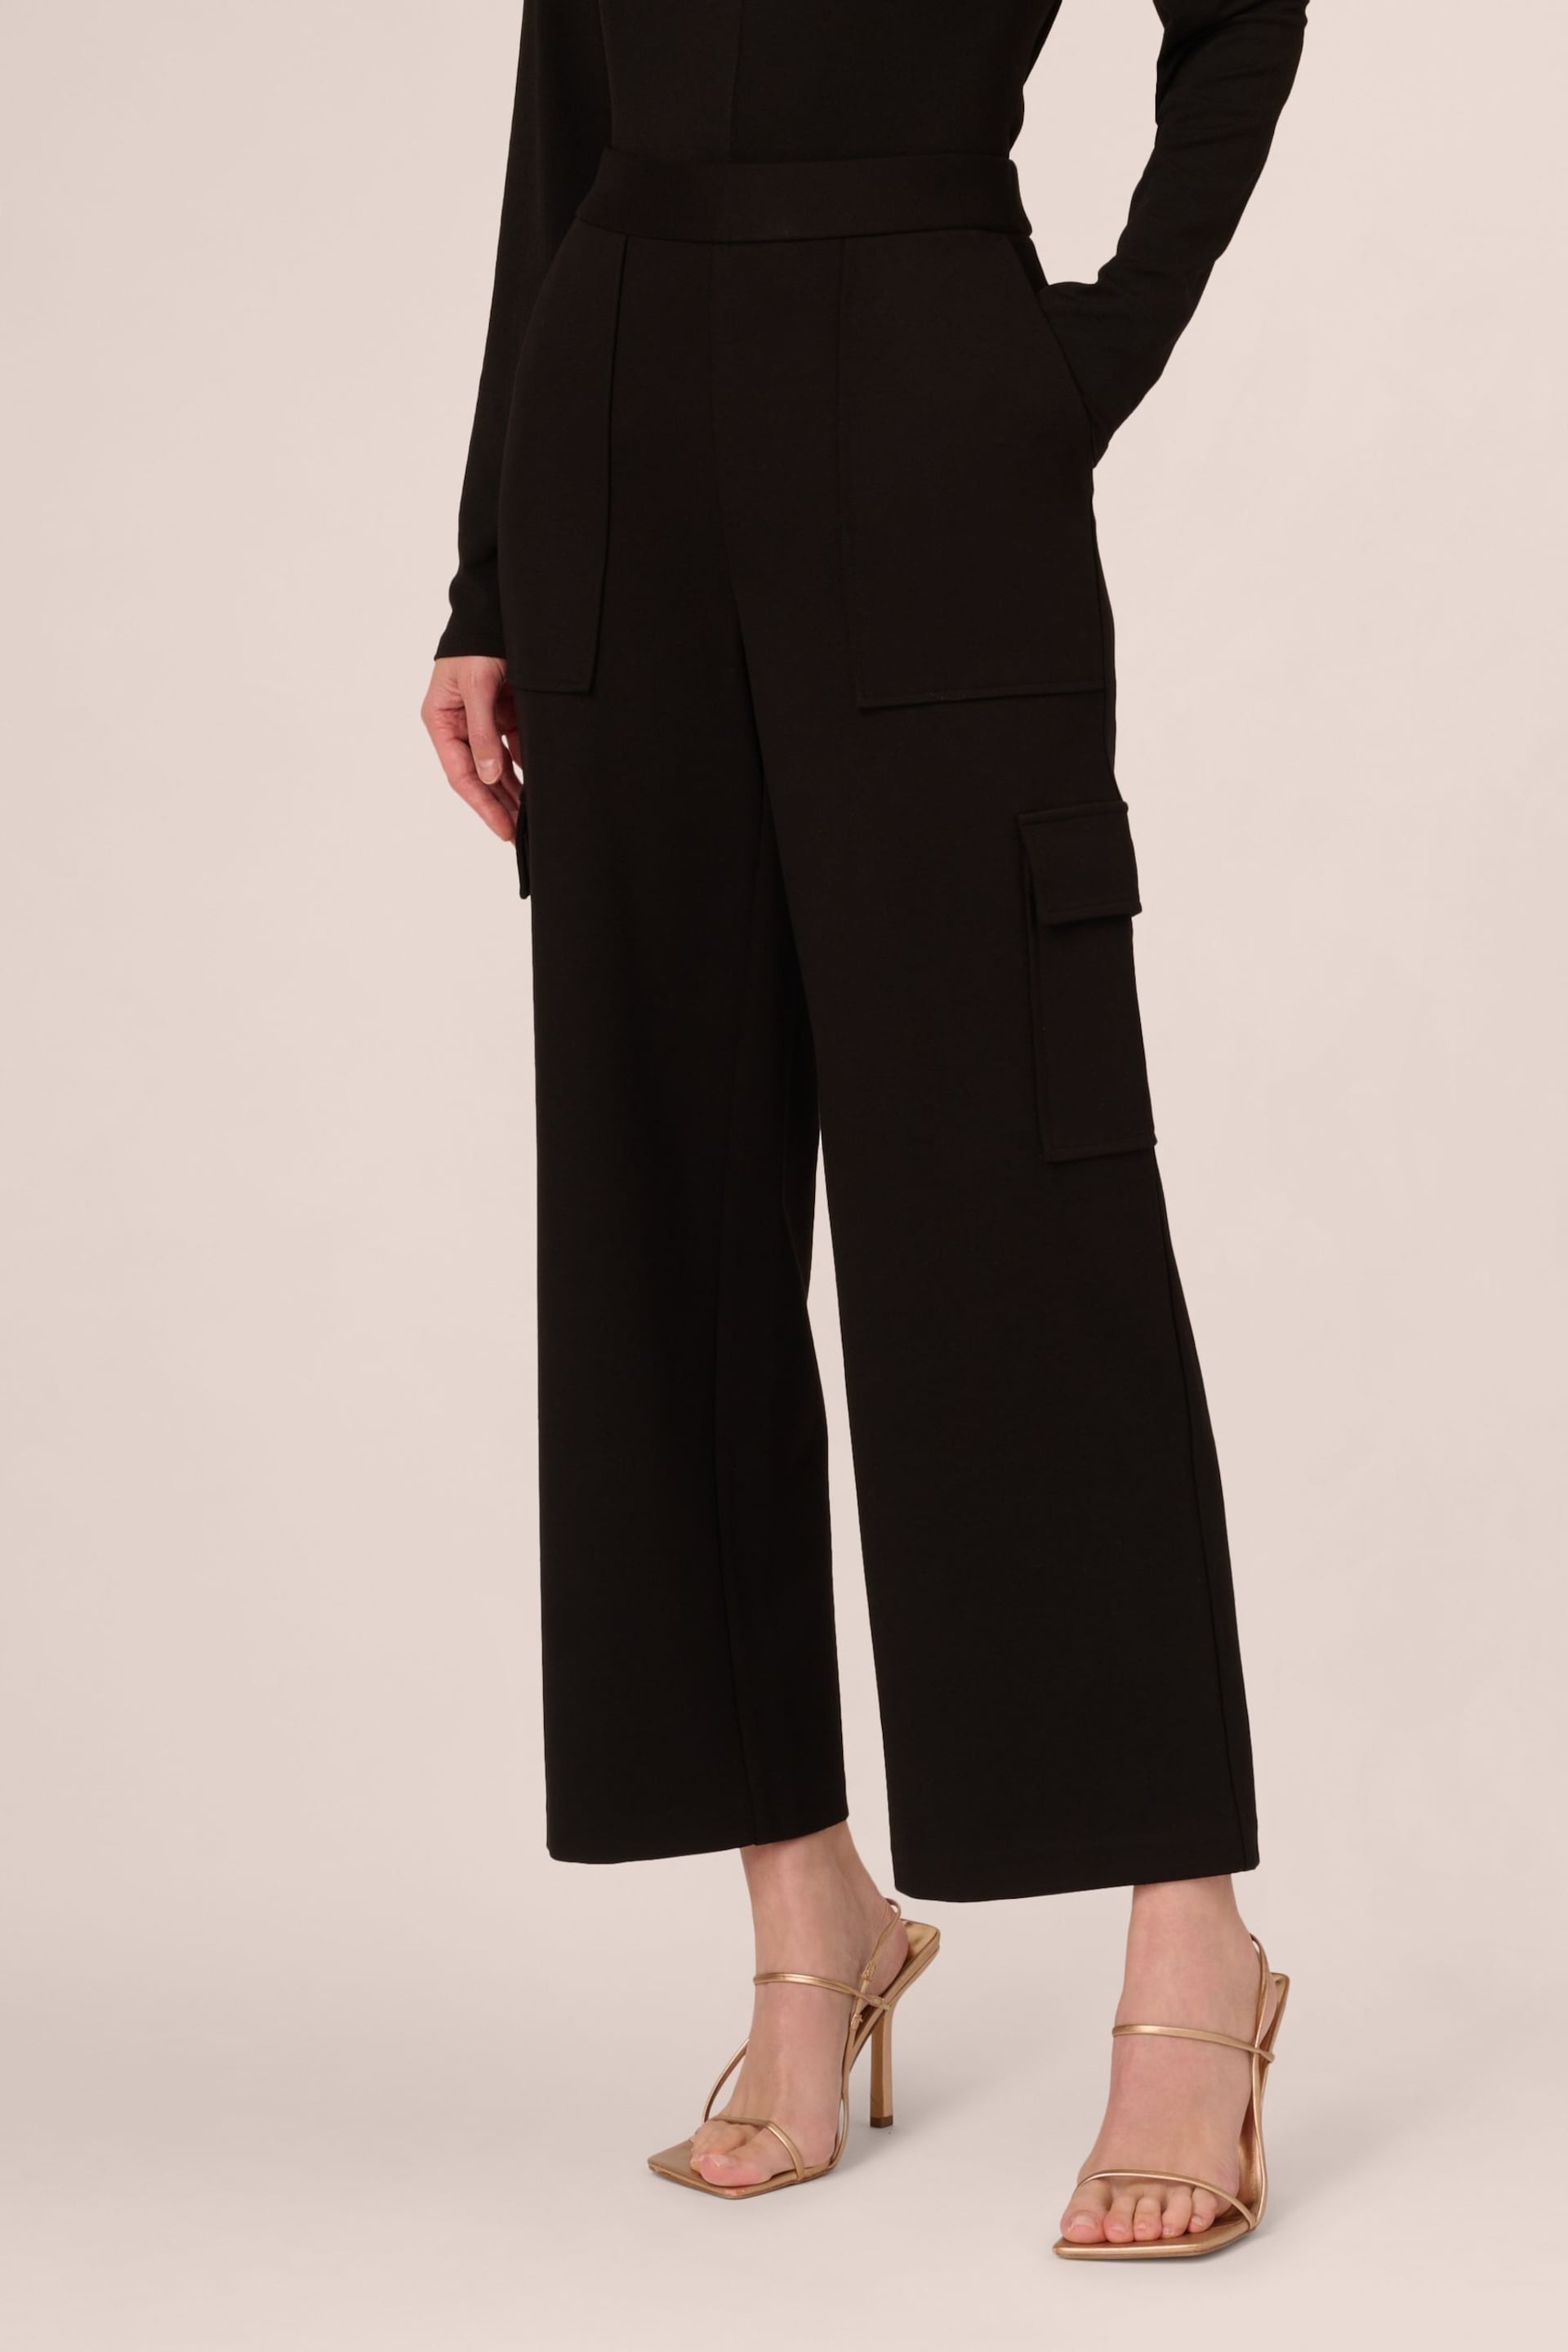 Adrianna Papell Ponte Knit Cargo Pull On Black Trouses - Image 1 of 6